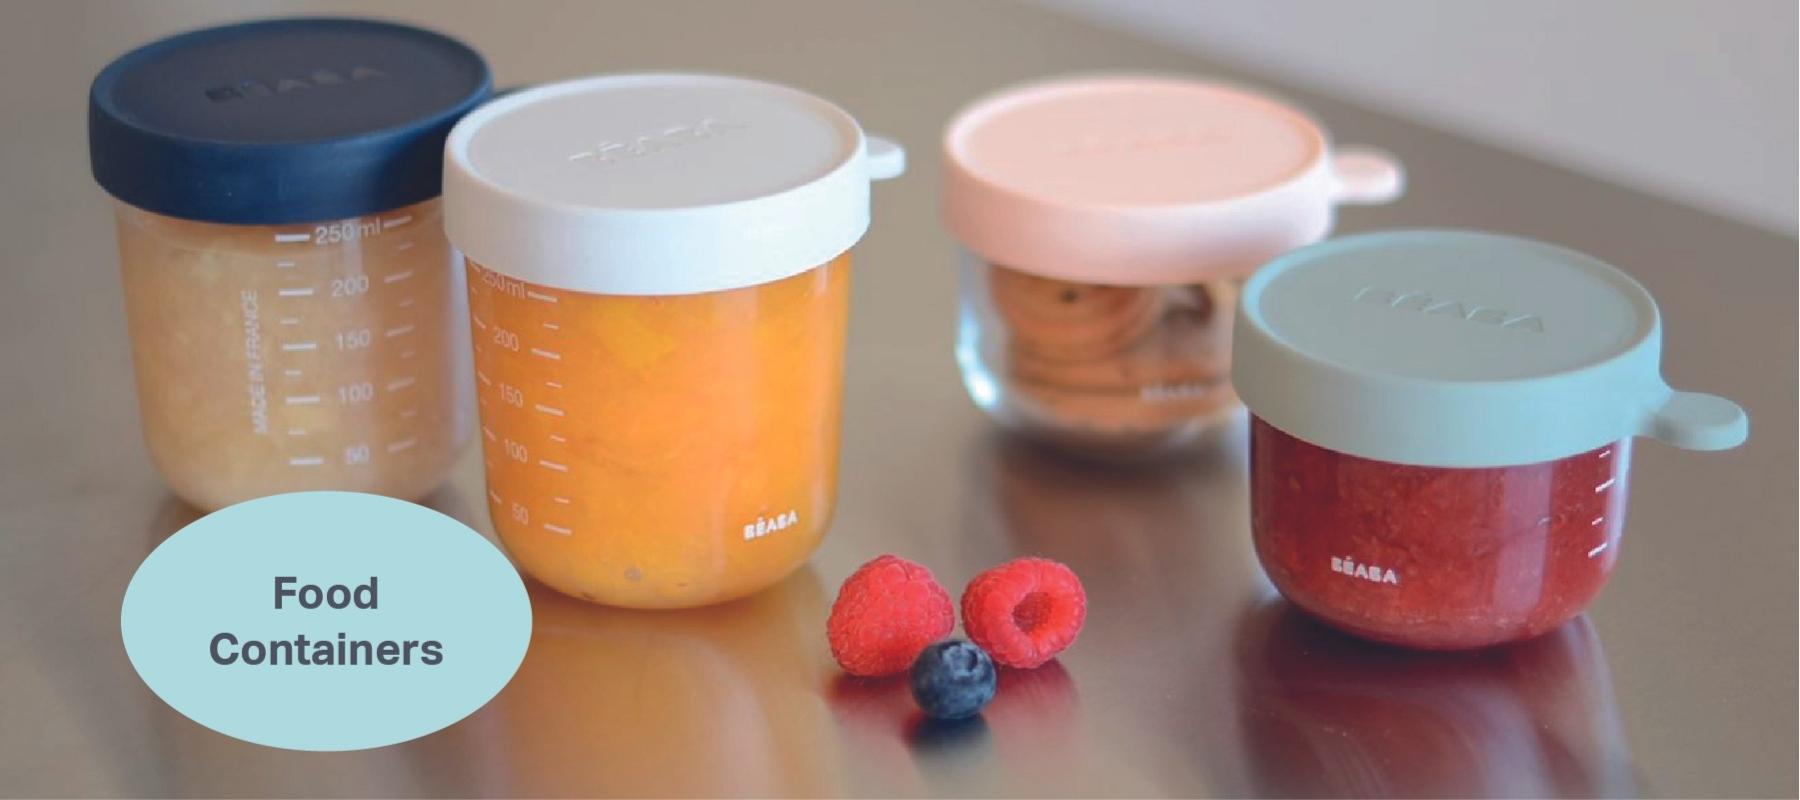 Food containers for baby food